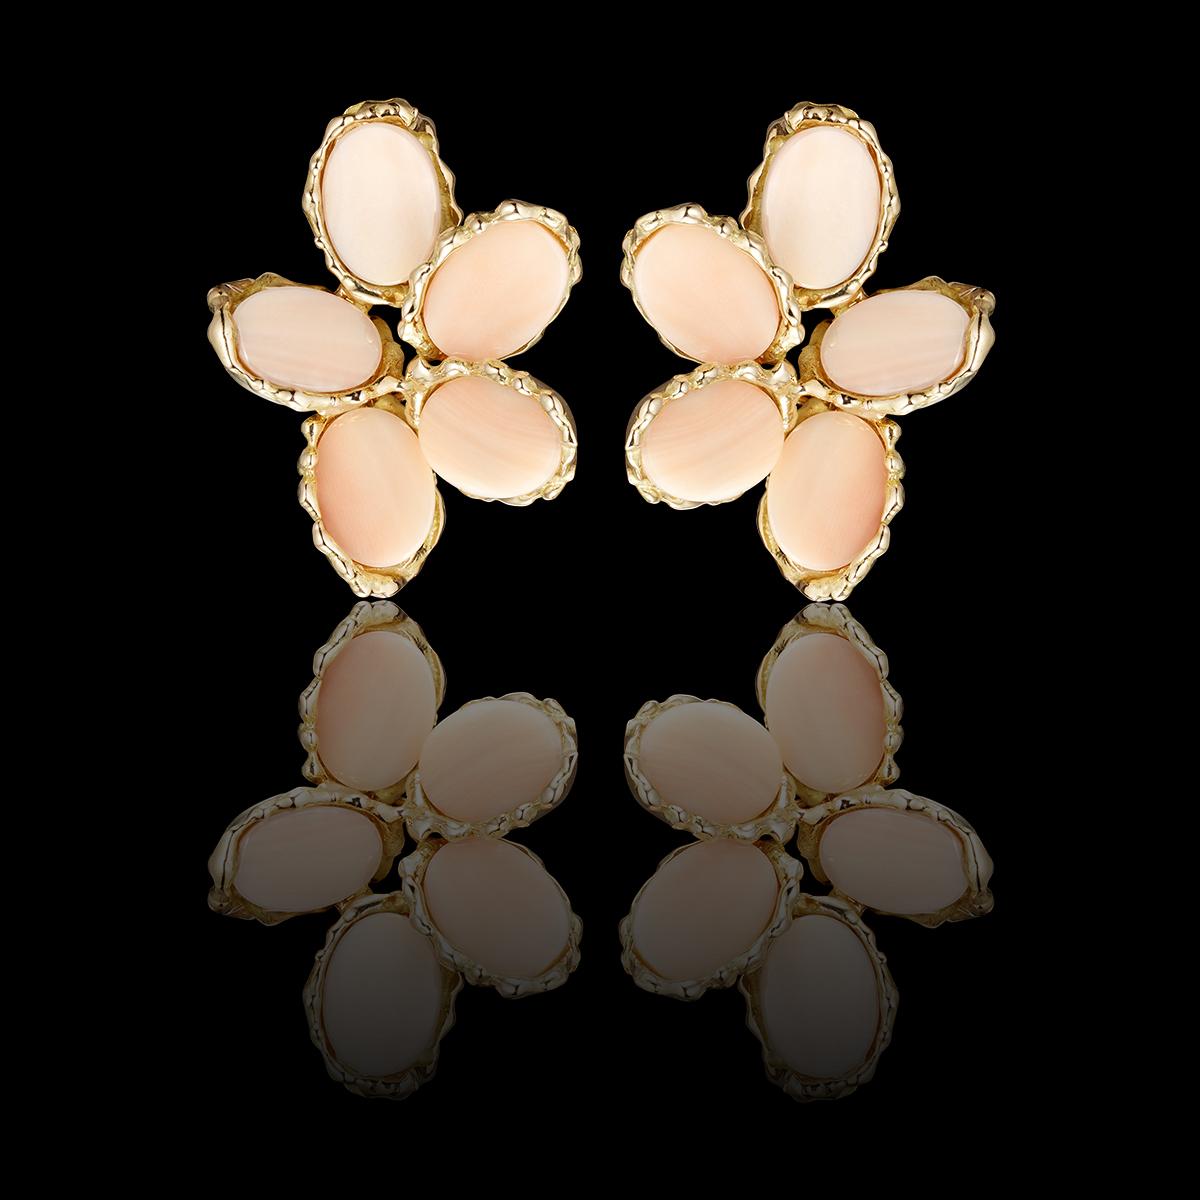 Chaumet -Very rares'Collectables' 1970s earrings made of angel skine coral, 18k yellow gold and 18k white gold.
-EAR PIERCE CLIP FITTINGS.
-LENGHT:4 centimiters.
-SIGNED-CHAUMET.
-WEIGHT:23,90 g.
-MADE IN FRANCE.